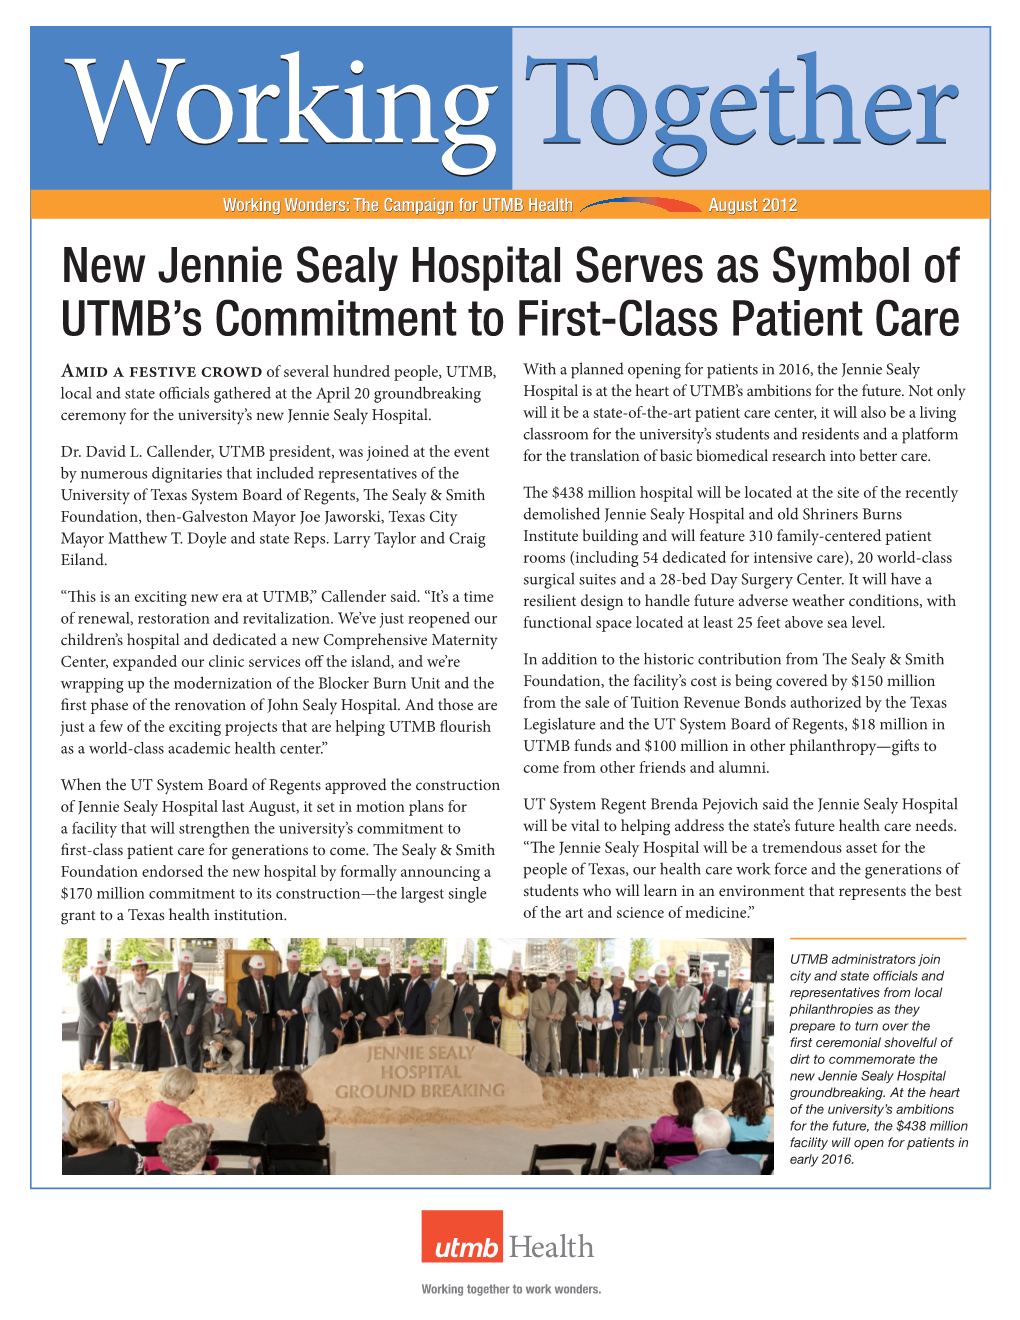 New Jennie Sealy Hospital Serves As Symbol of UTMB's Commitment To